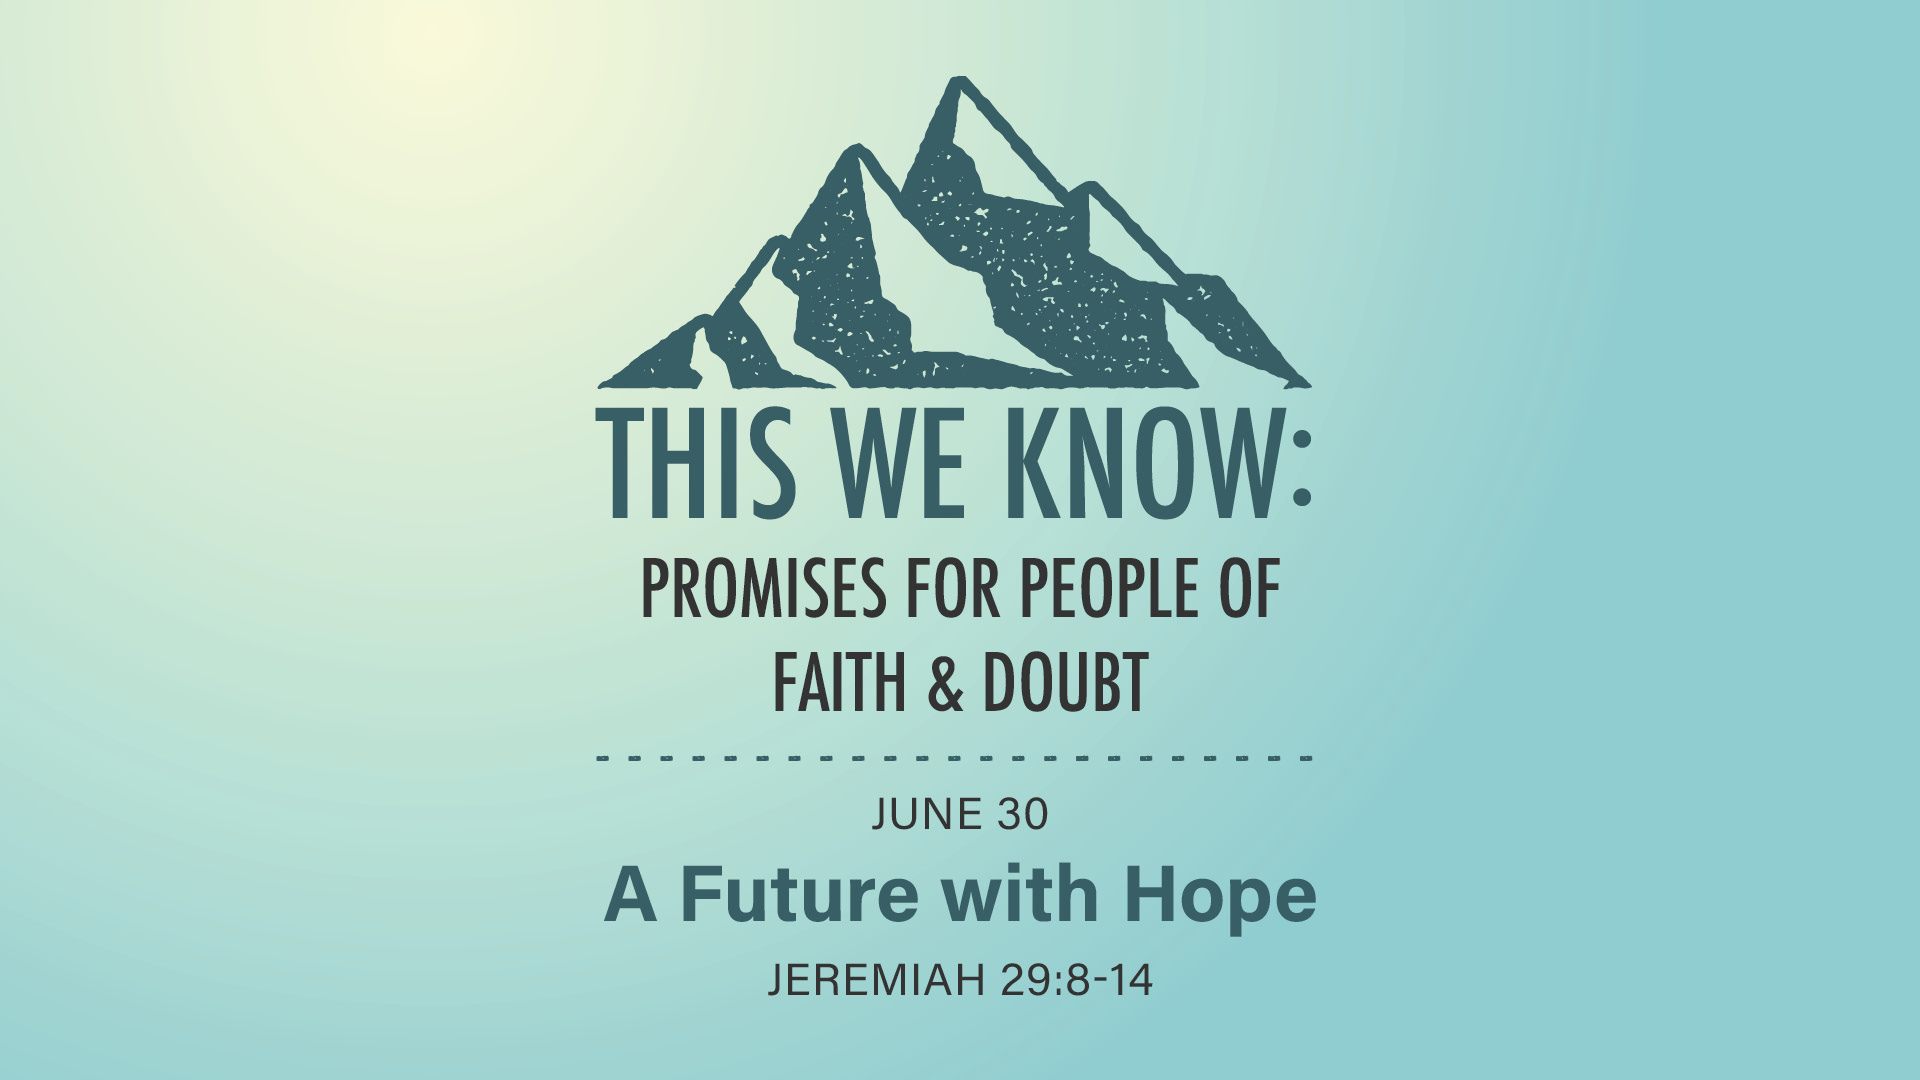 June 30 - This We Know: Promises for People of Faith & Doubt: A Future with Hope